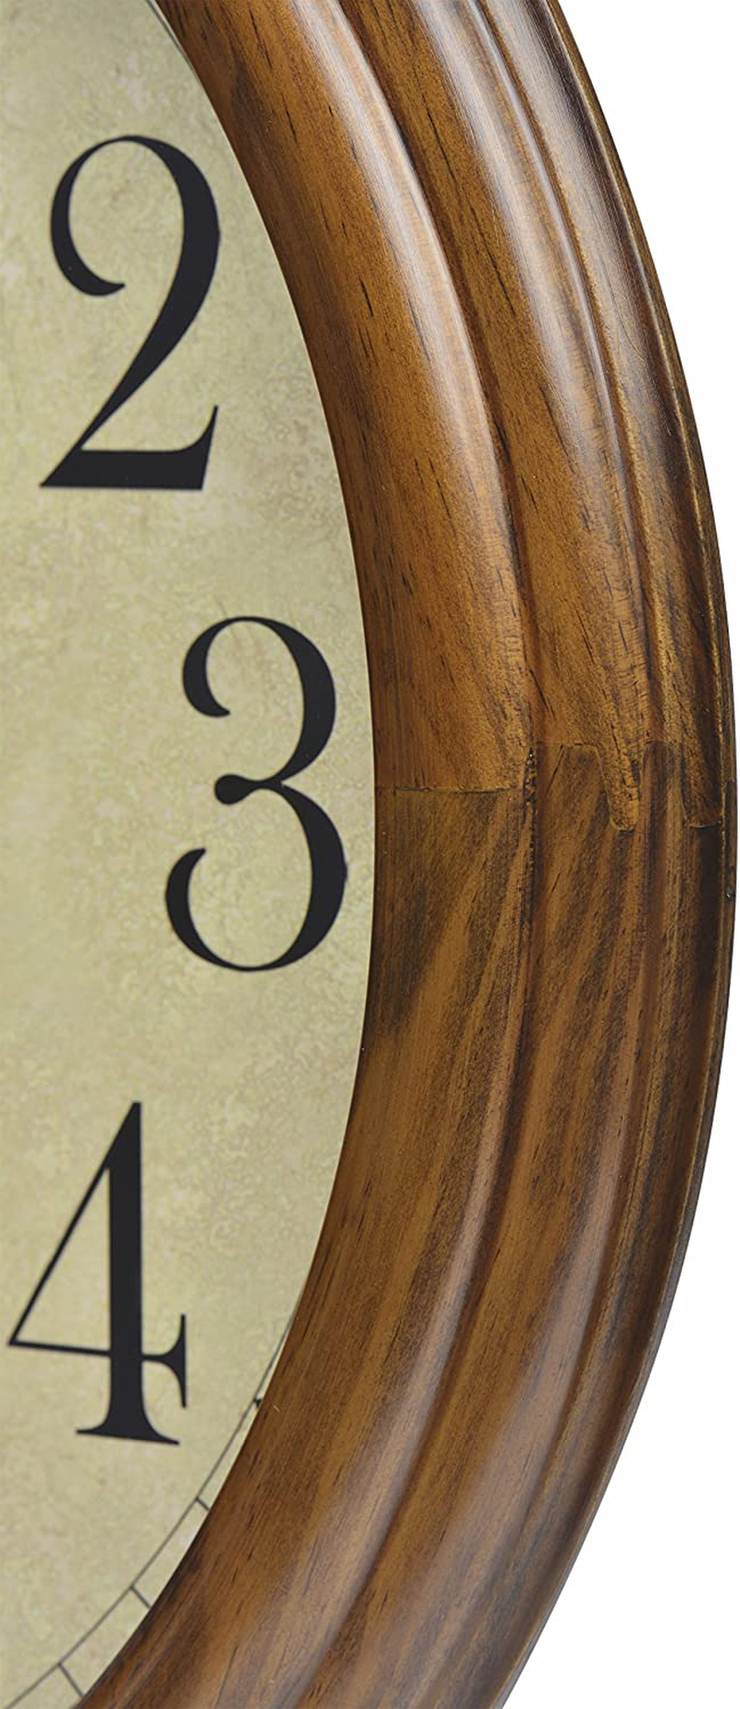 16-Inch Solid Wood Silent Non-Ticking Decorative Wall Clock with Large Arabic Numerals